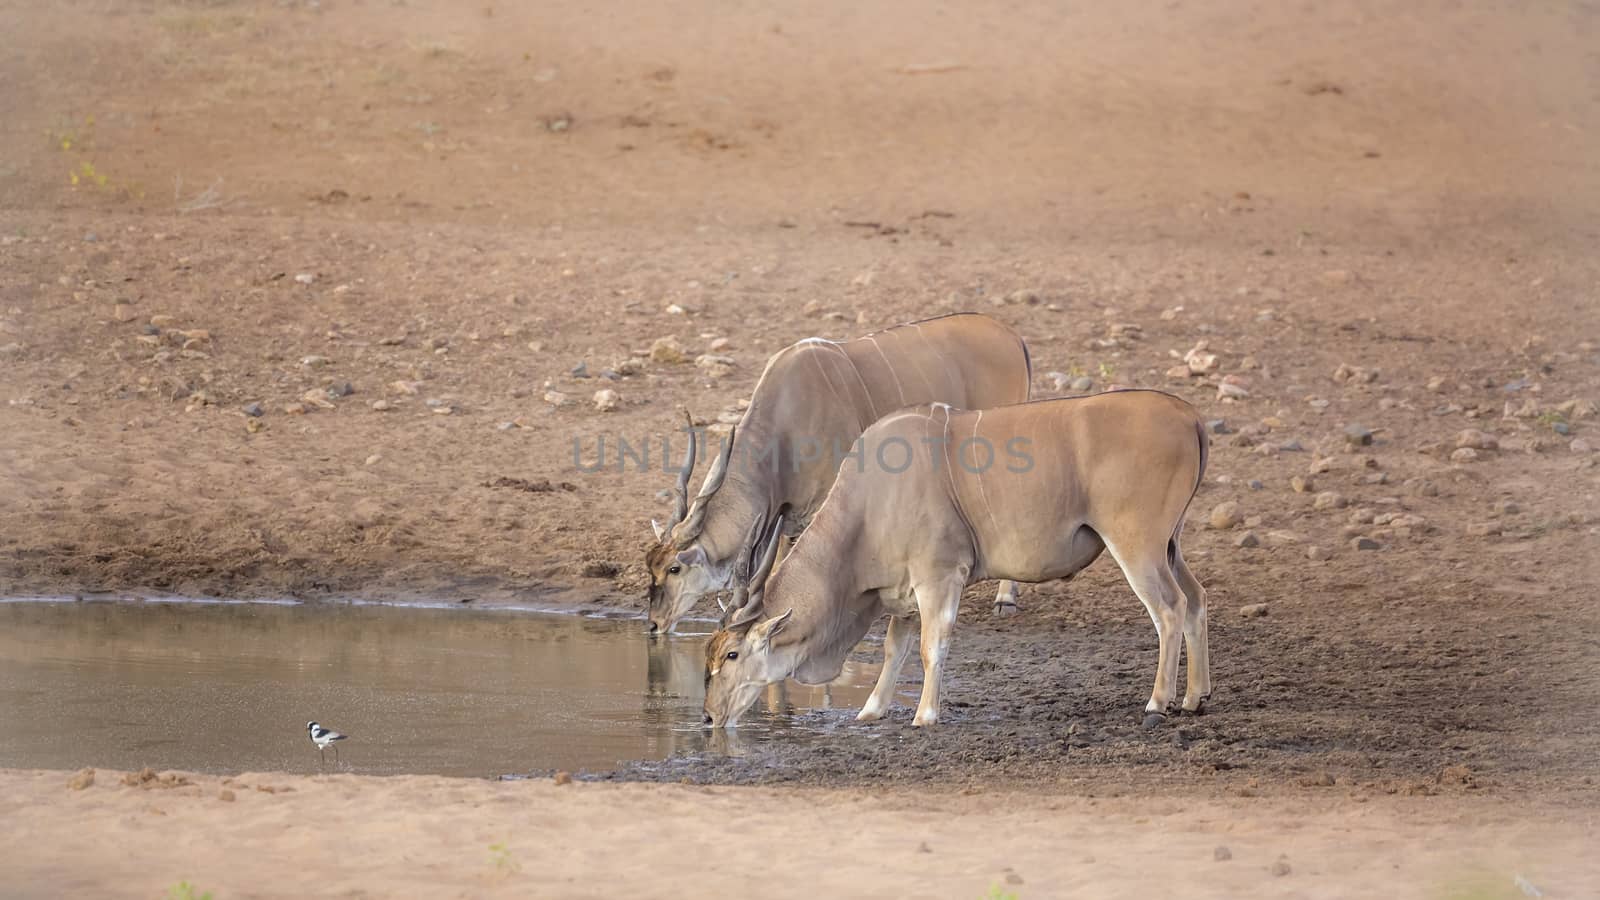 Two Common elands drinking in waterhole in Kruger National park, South Africa ; Specie Taurotragus oryx family of Bovidae